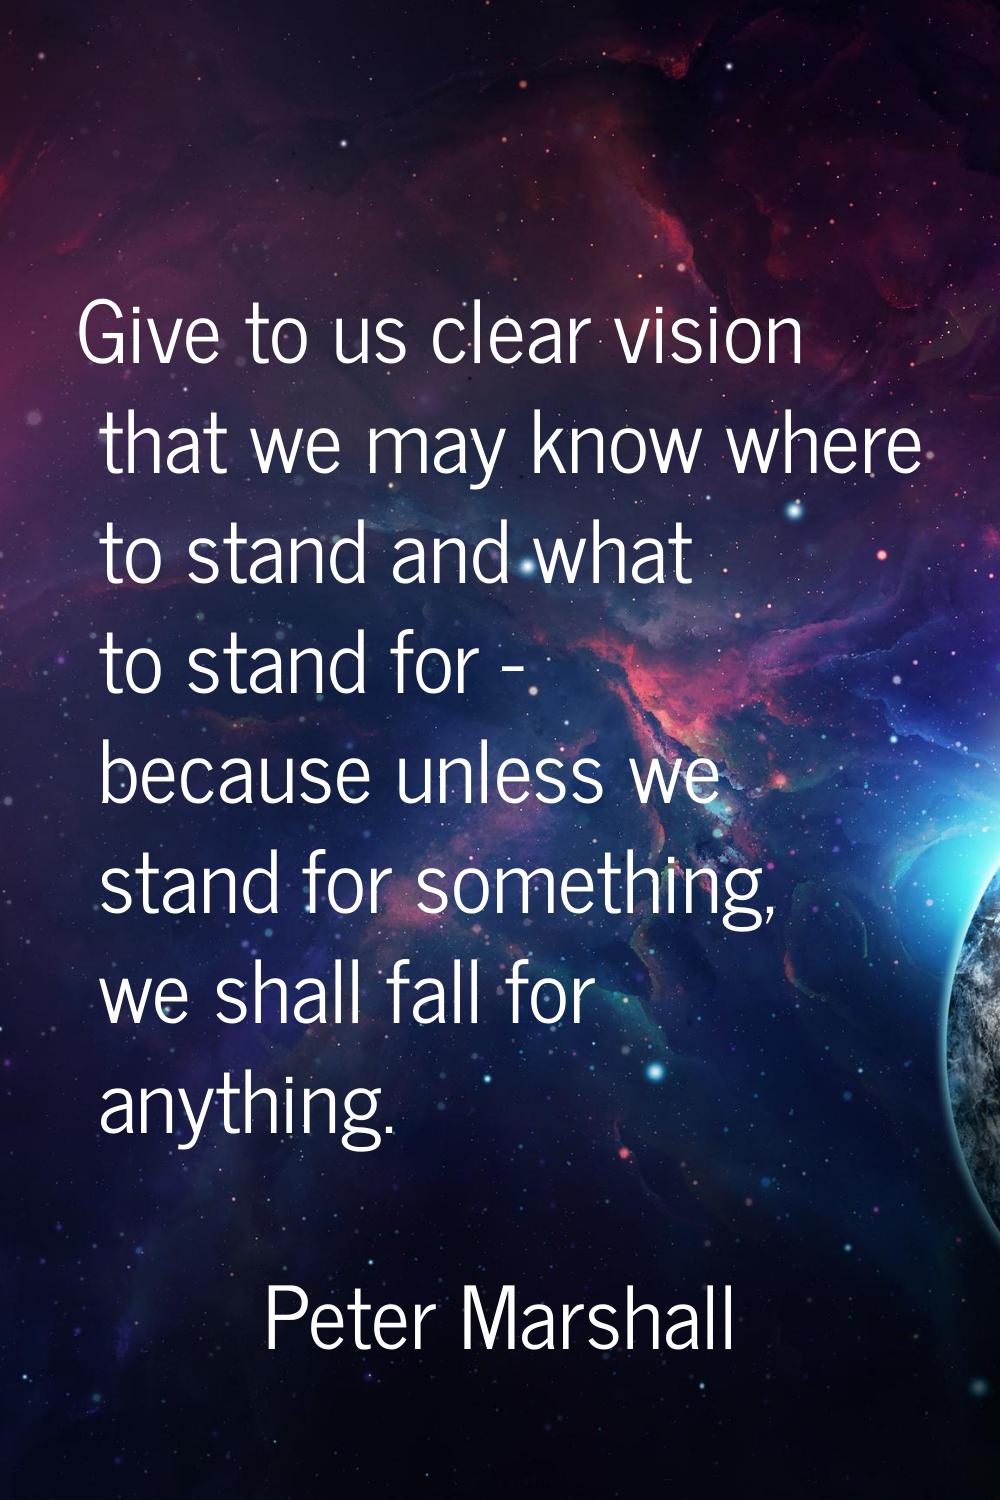 Give to us clear vision that we may know where to stand and what to stand for - because unless we s